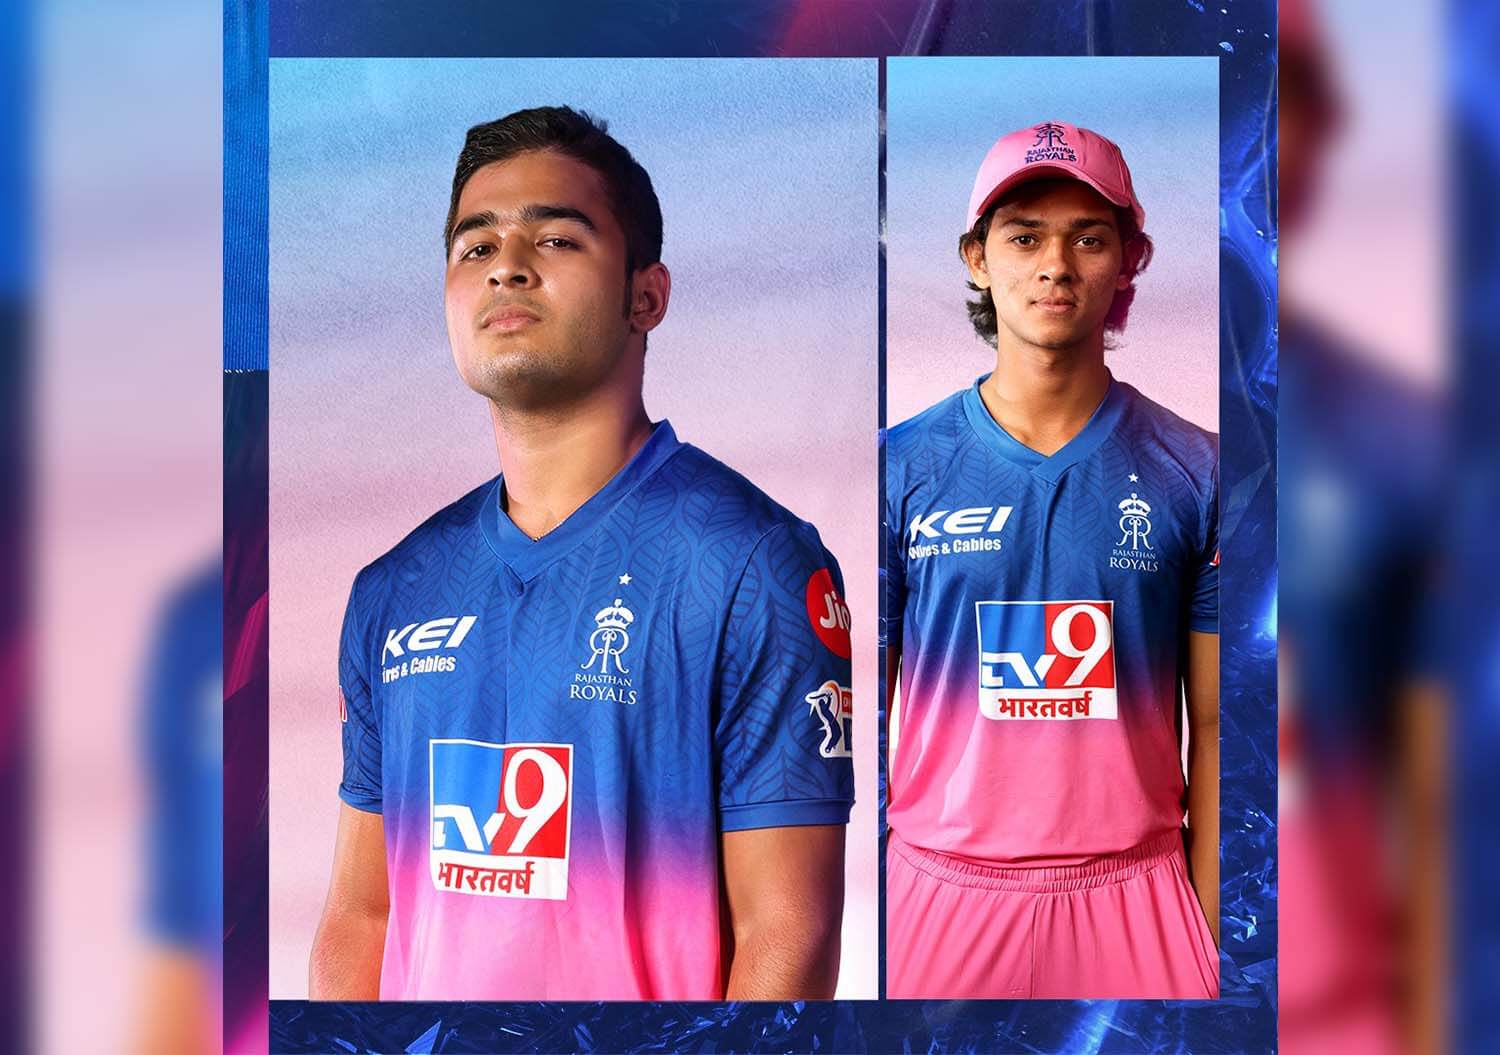 rajasthan royals official jersey